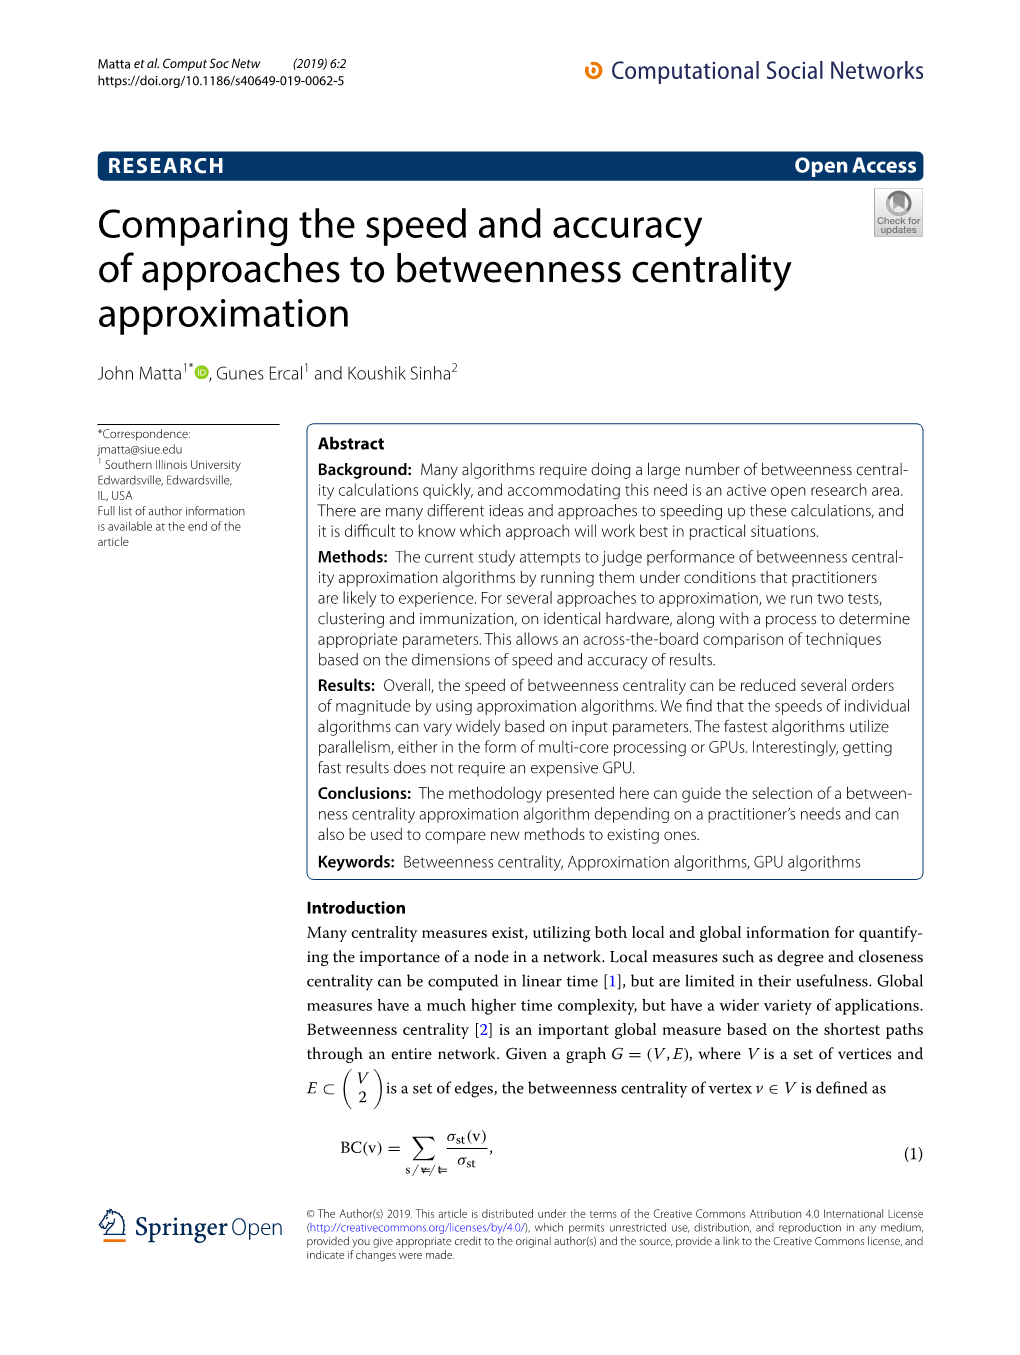 Comparing the Speed and Accuracy of Approaches to Betweenness Centrality Approximation